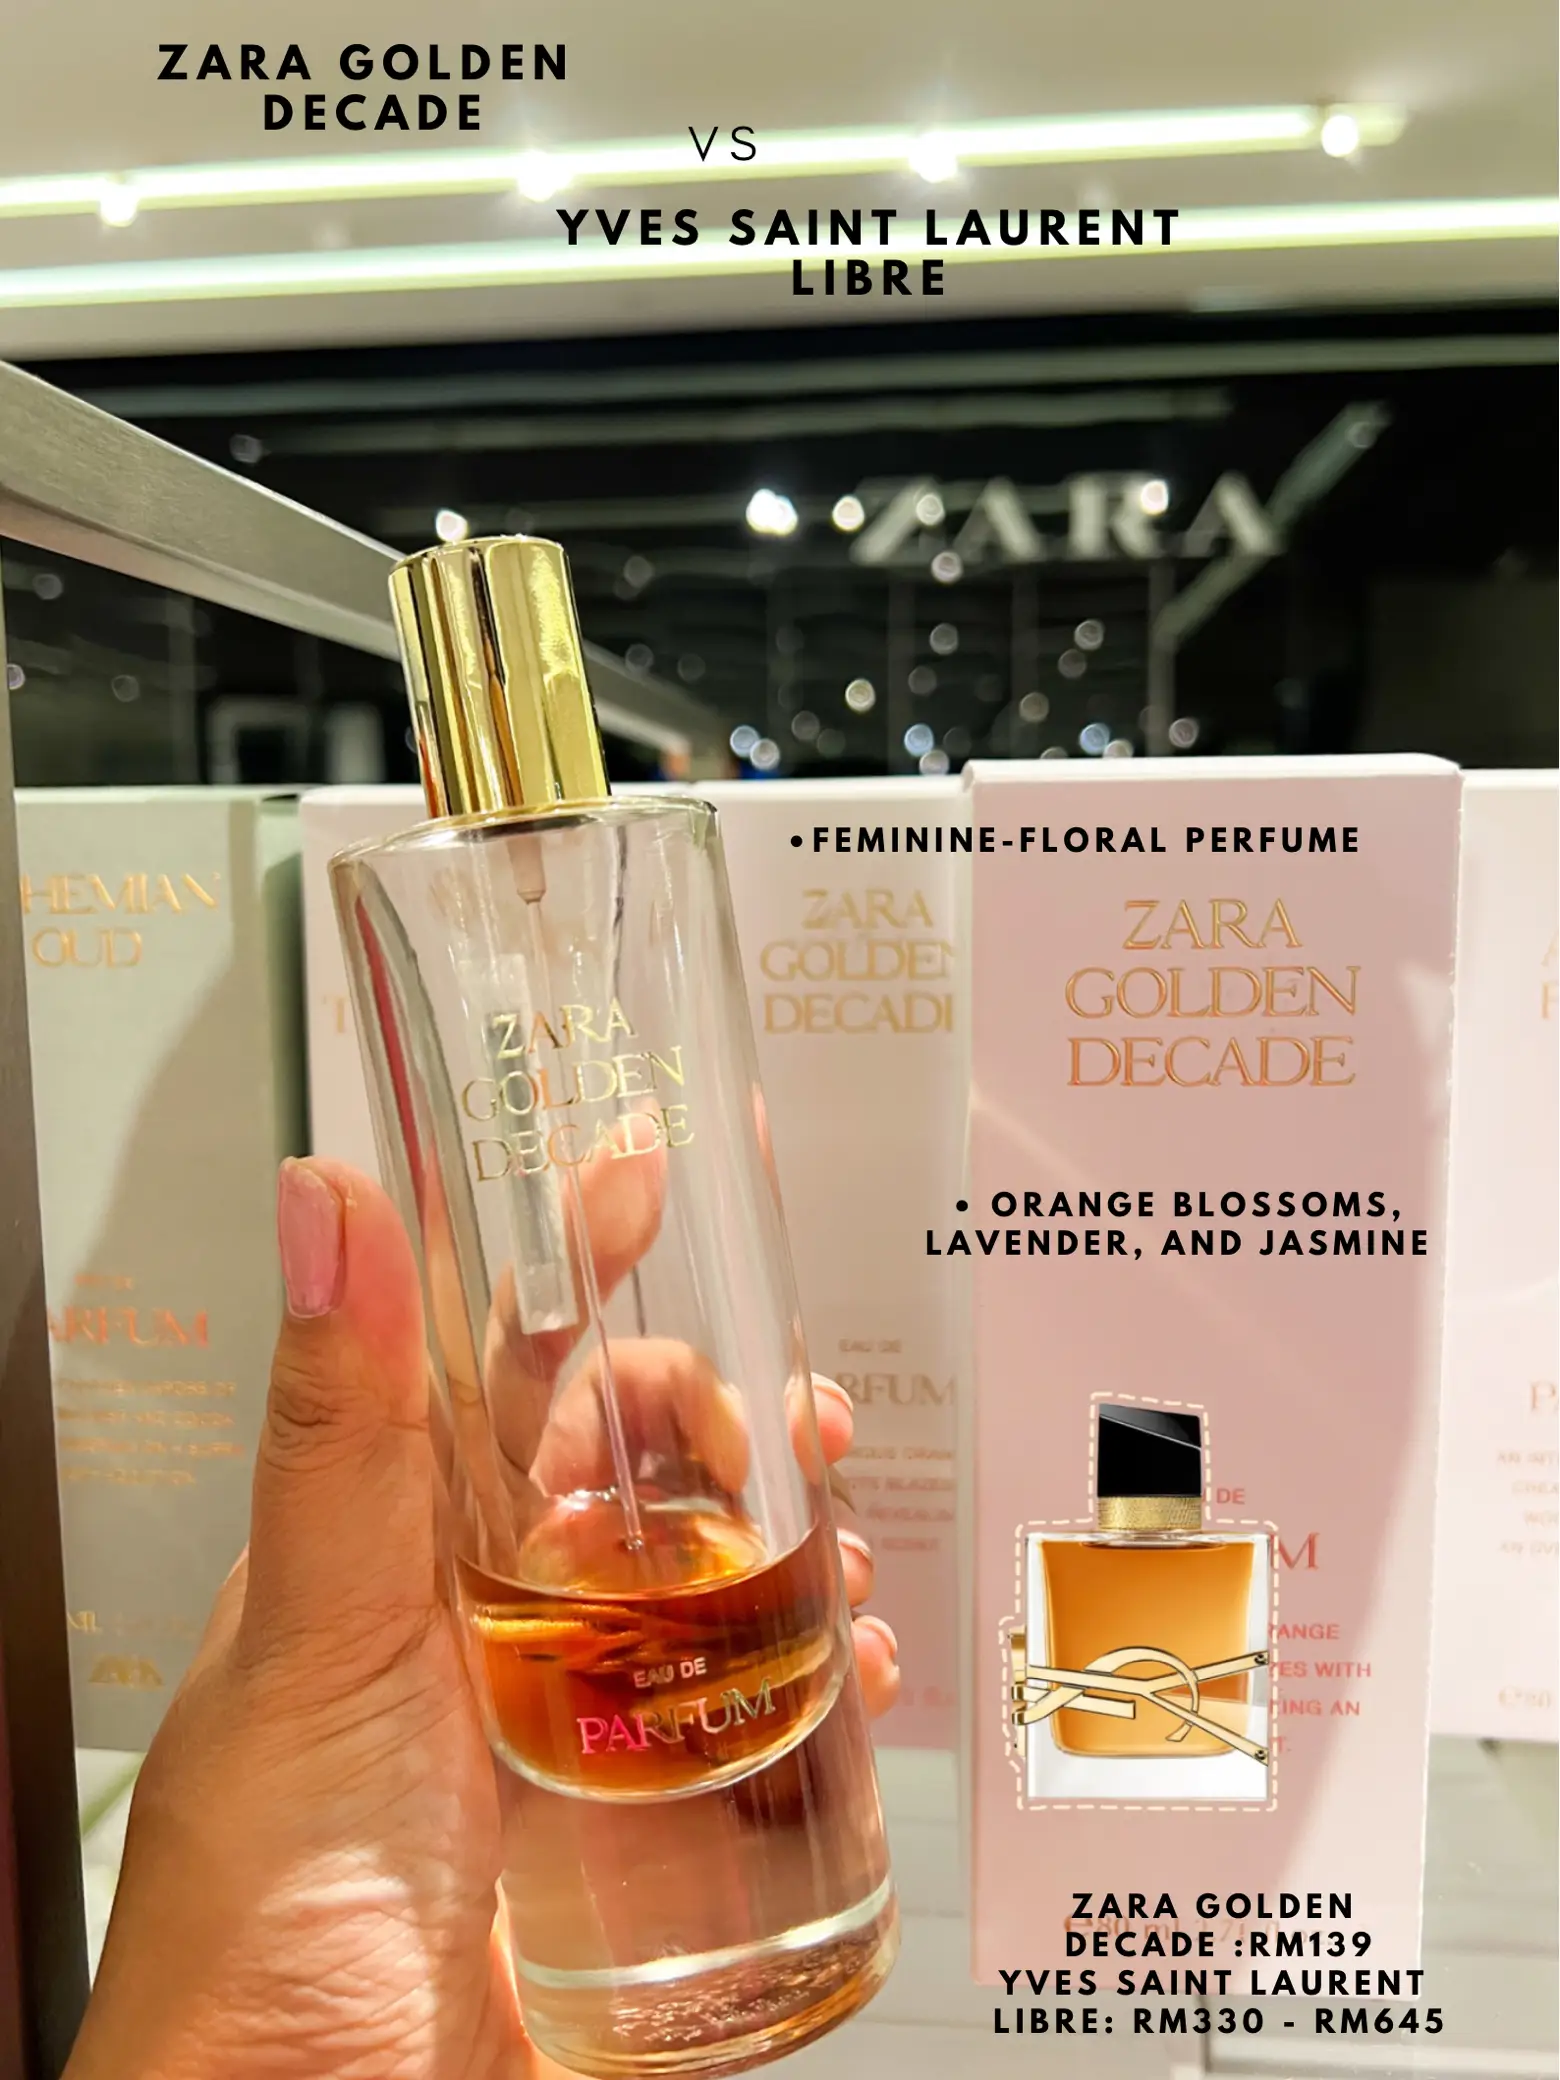 Zara dupes for famous designer and niche fragrances. Found this on